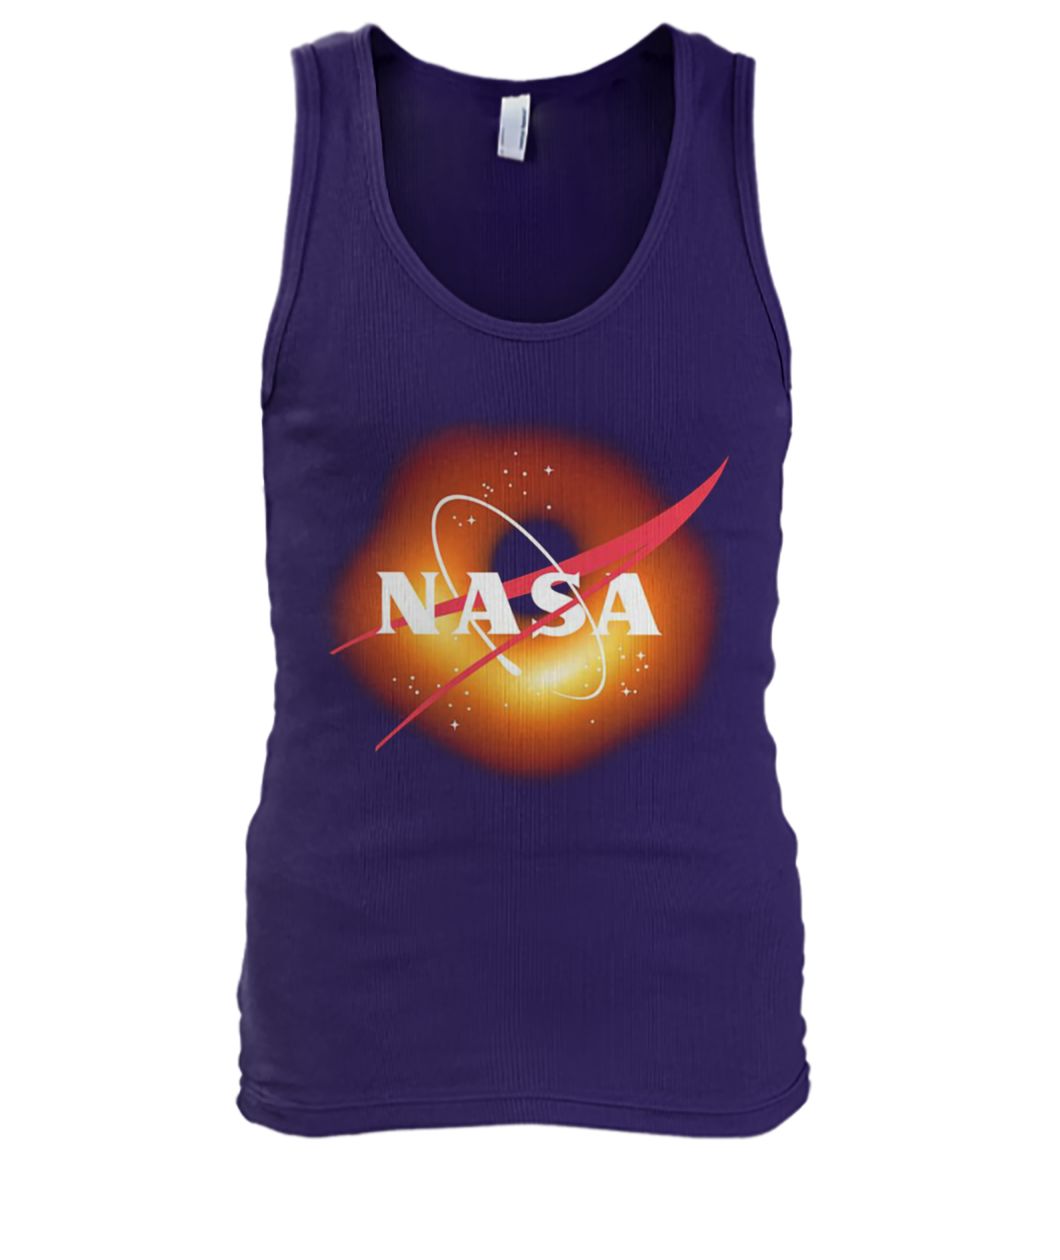 NASA first image of a black hole 2019 men's tank top